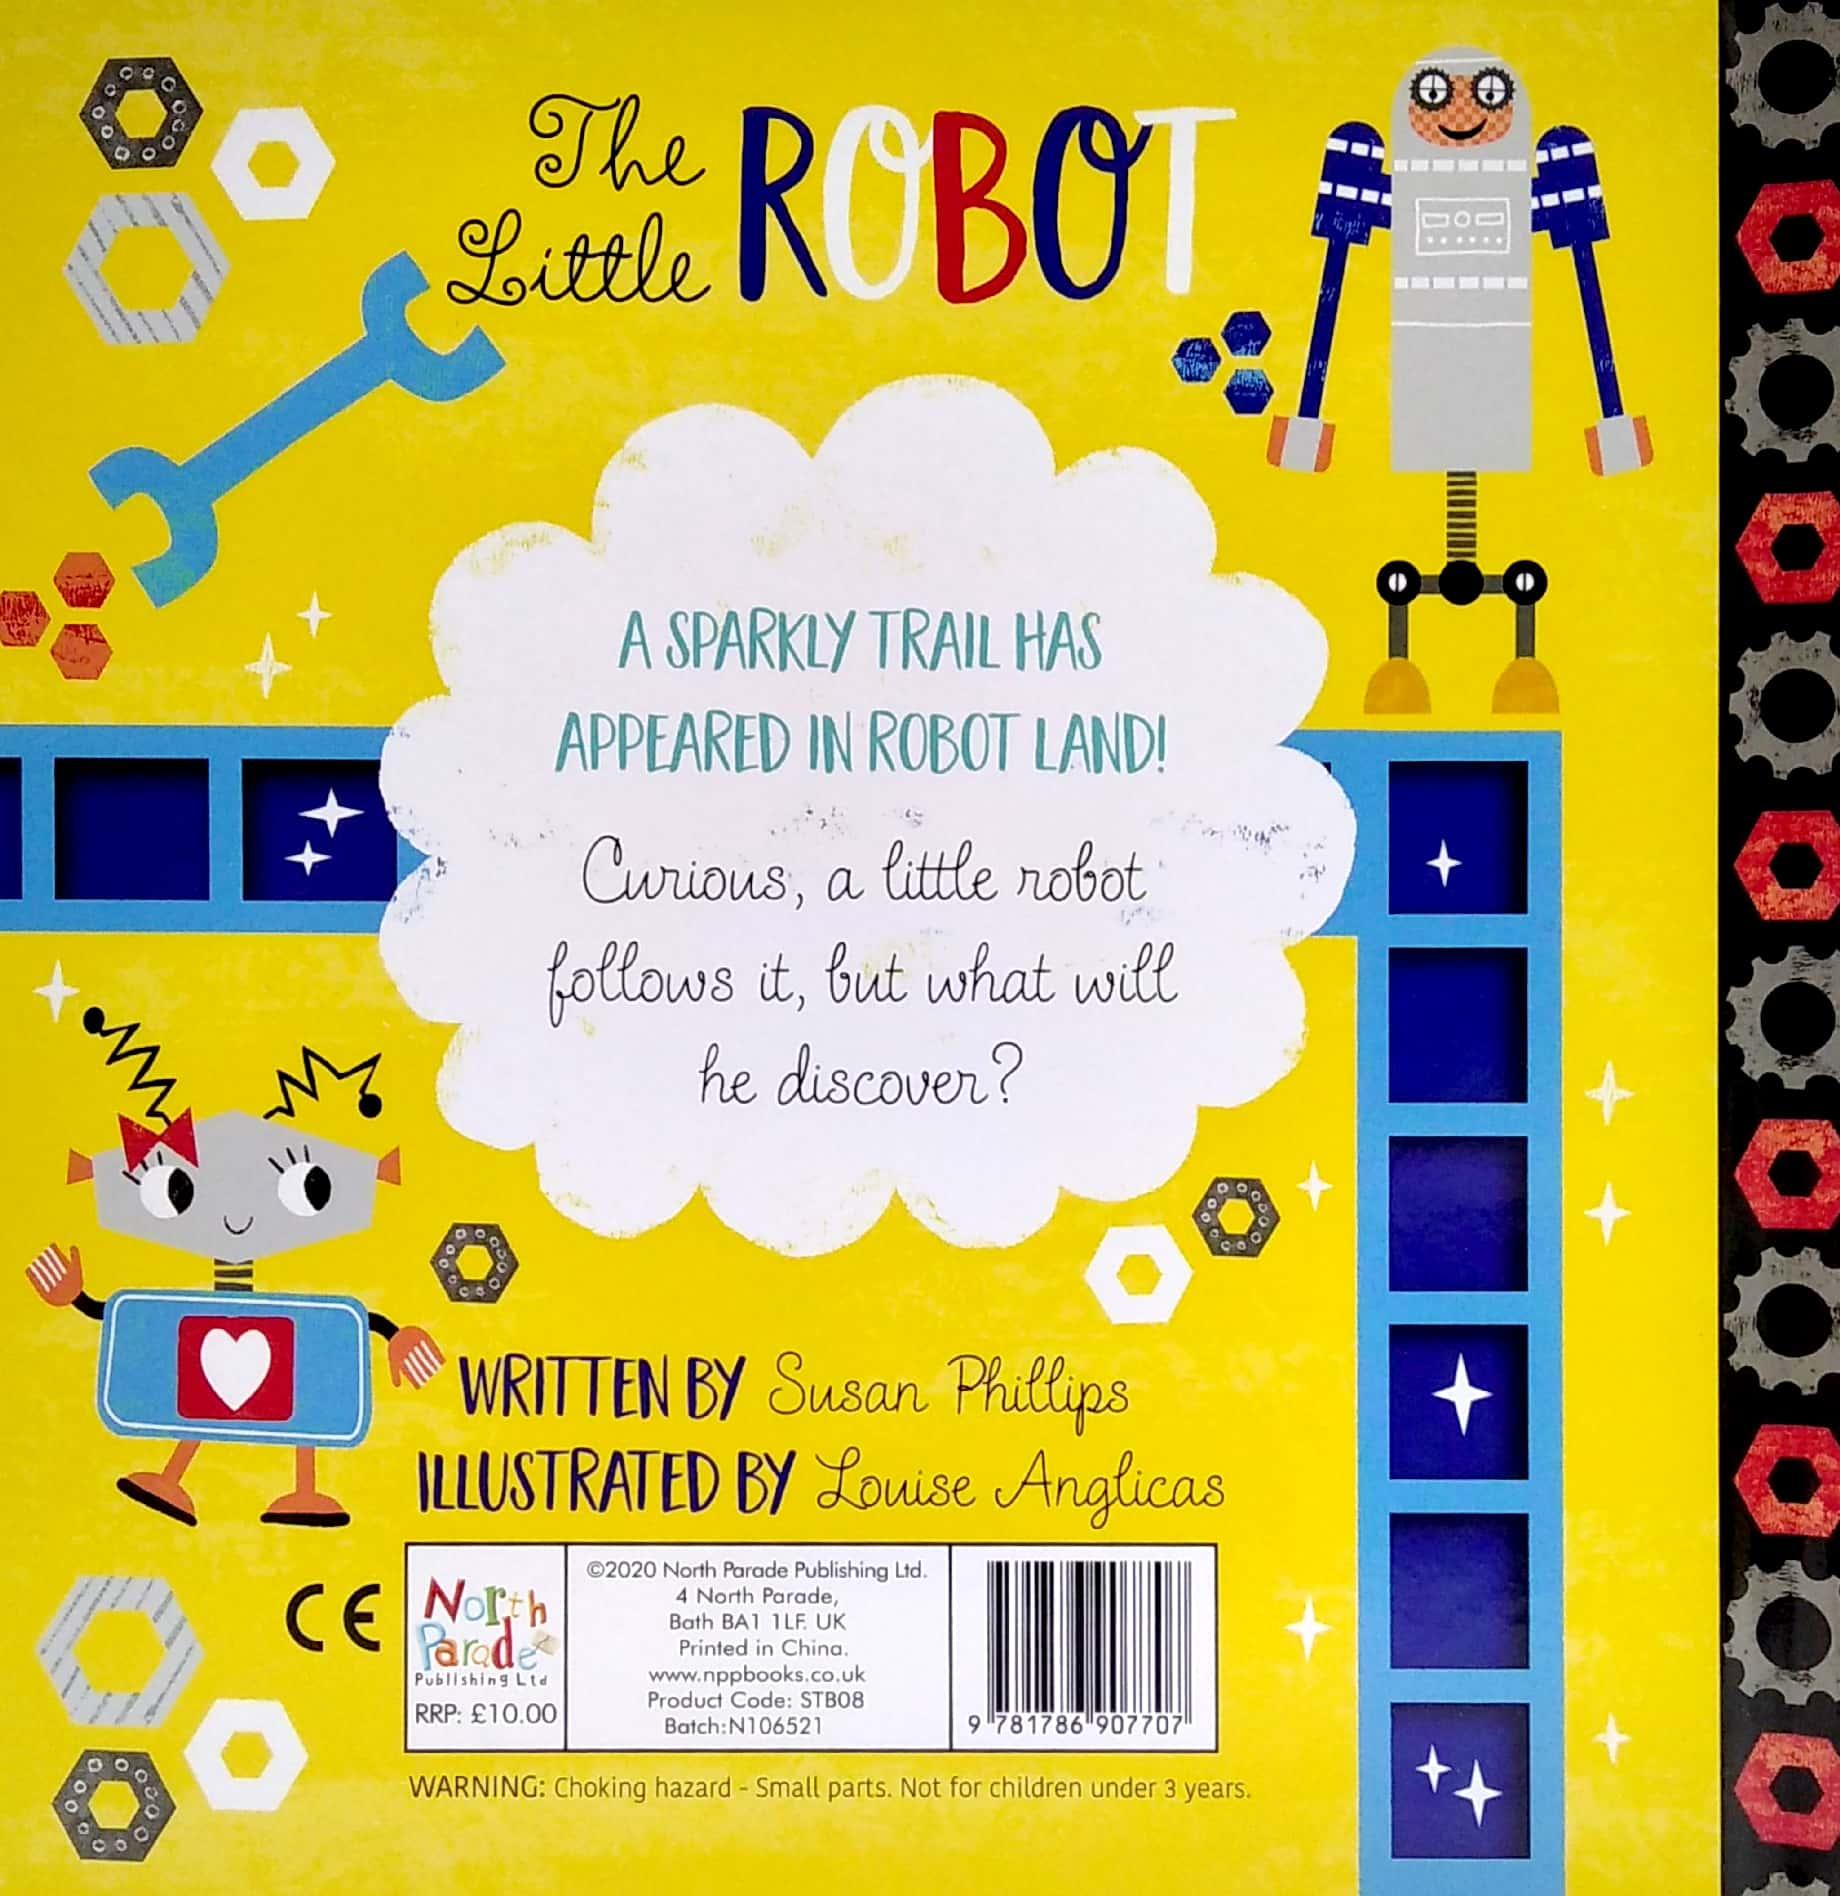 A Sparkly Trail Book: Robot